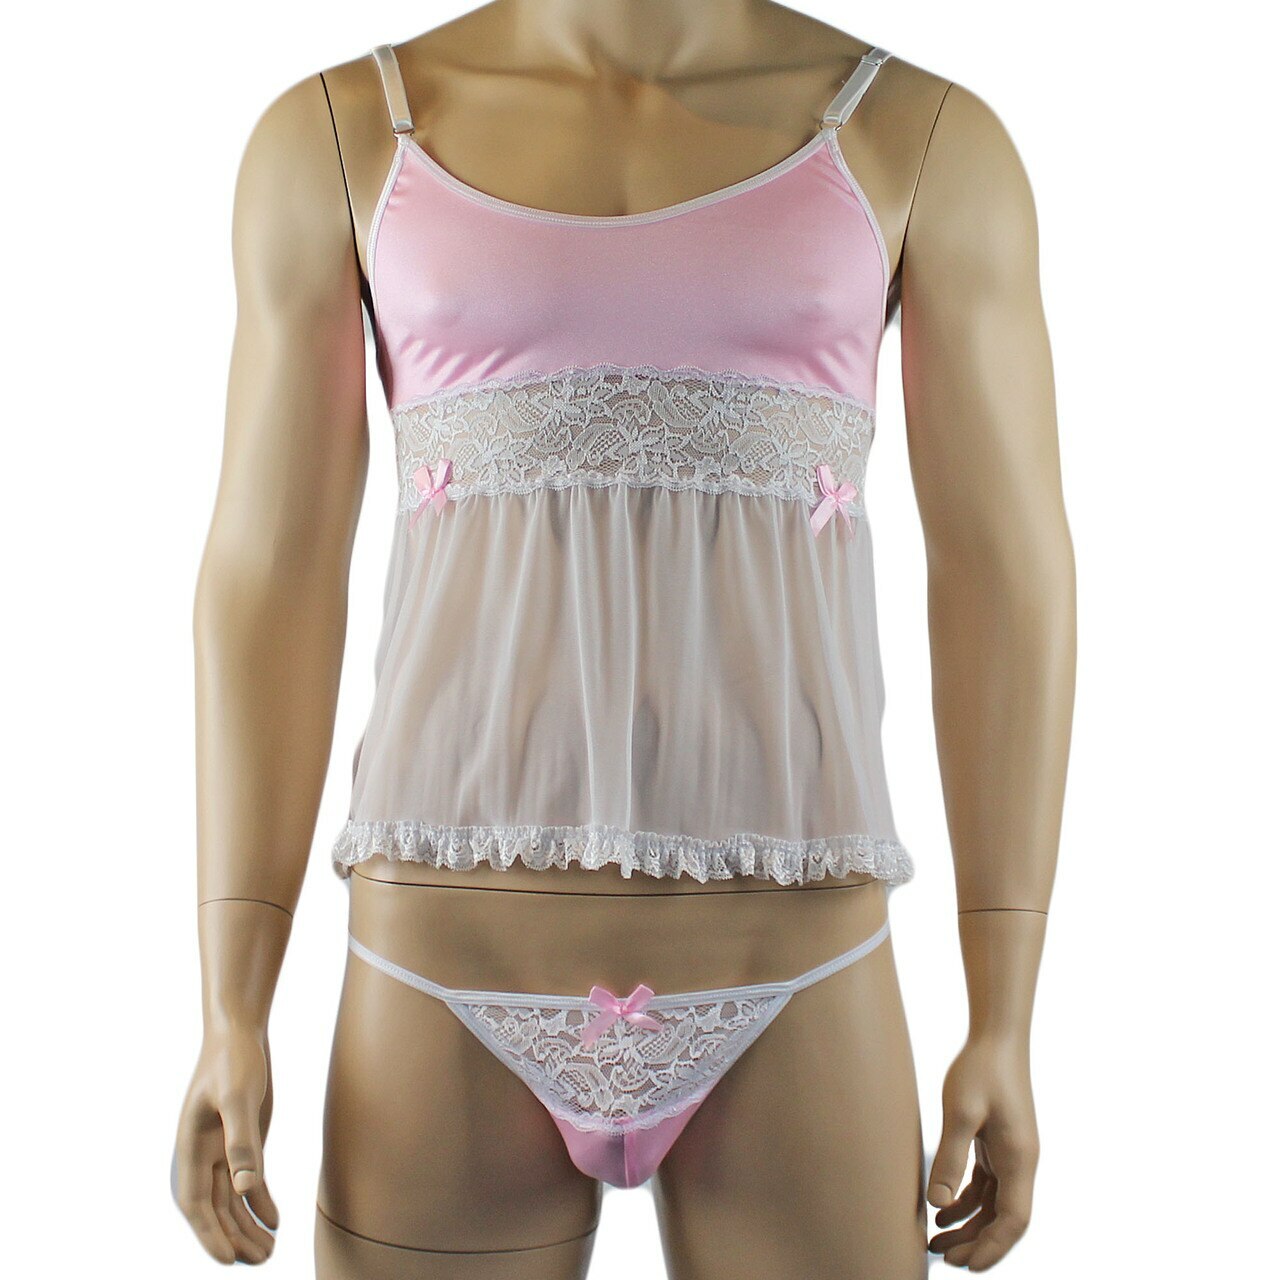 Mens Joanne Mini Babydoll Camisole & G string - Sizes up to 3XL Light Pink & White